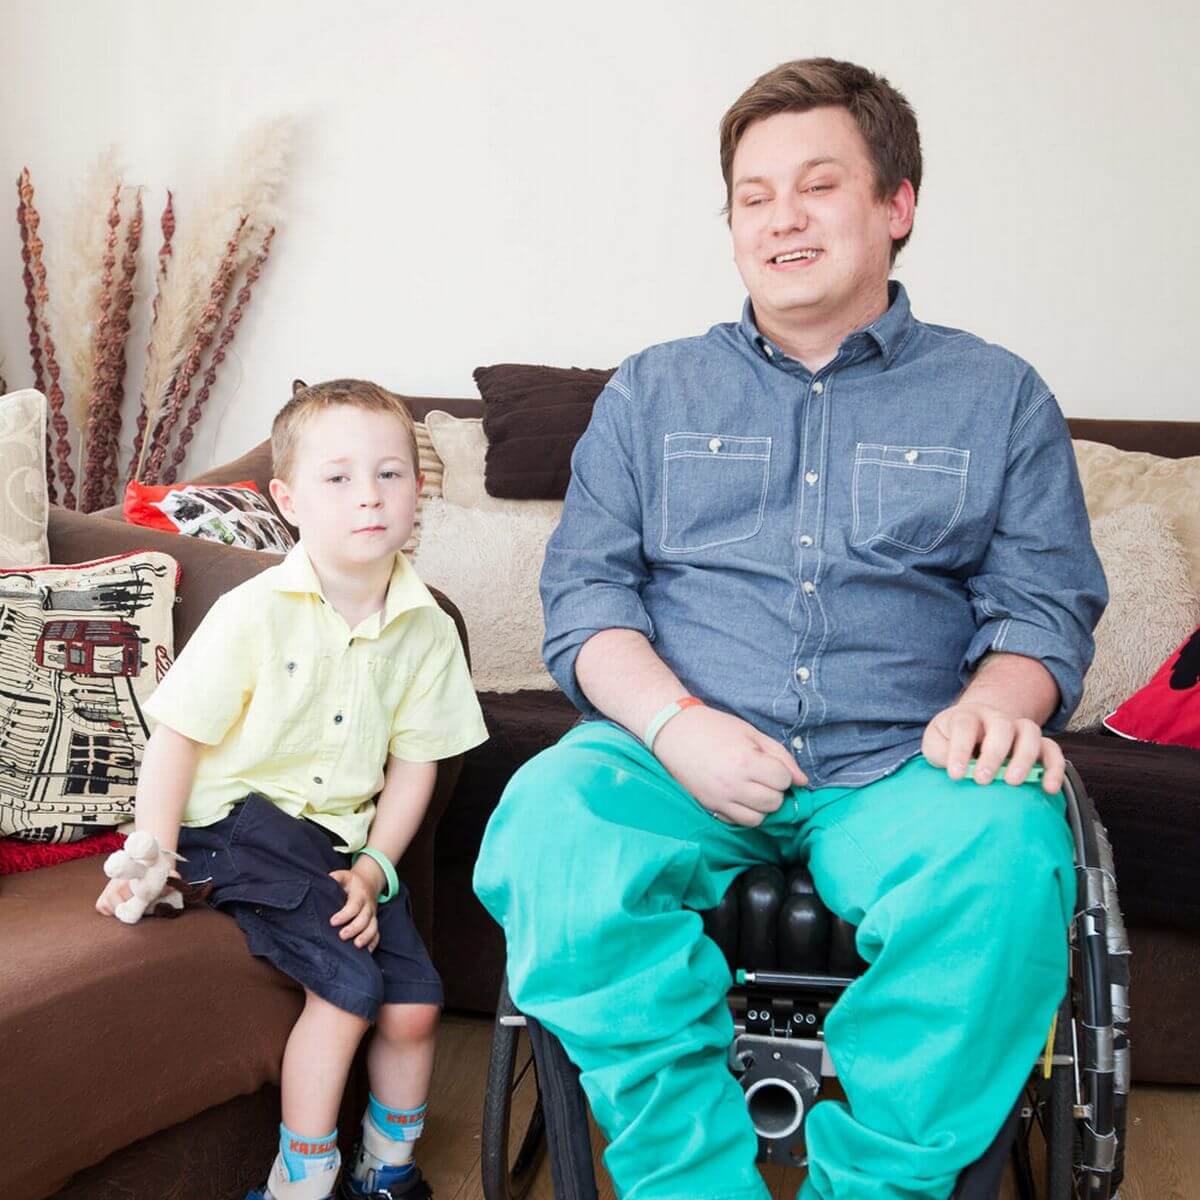 Man gave his stem cell fund to a disabled boy 2